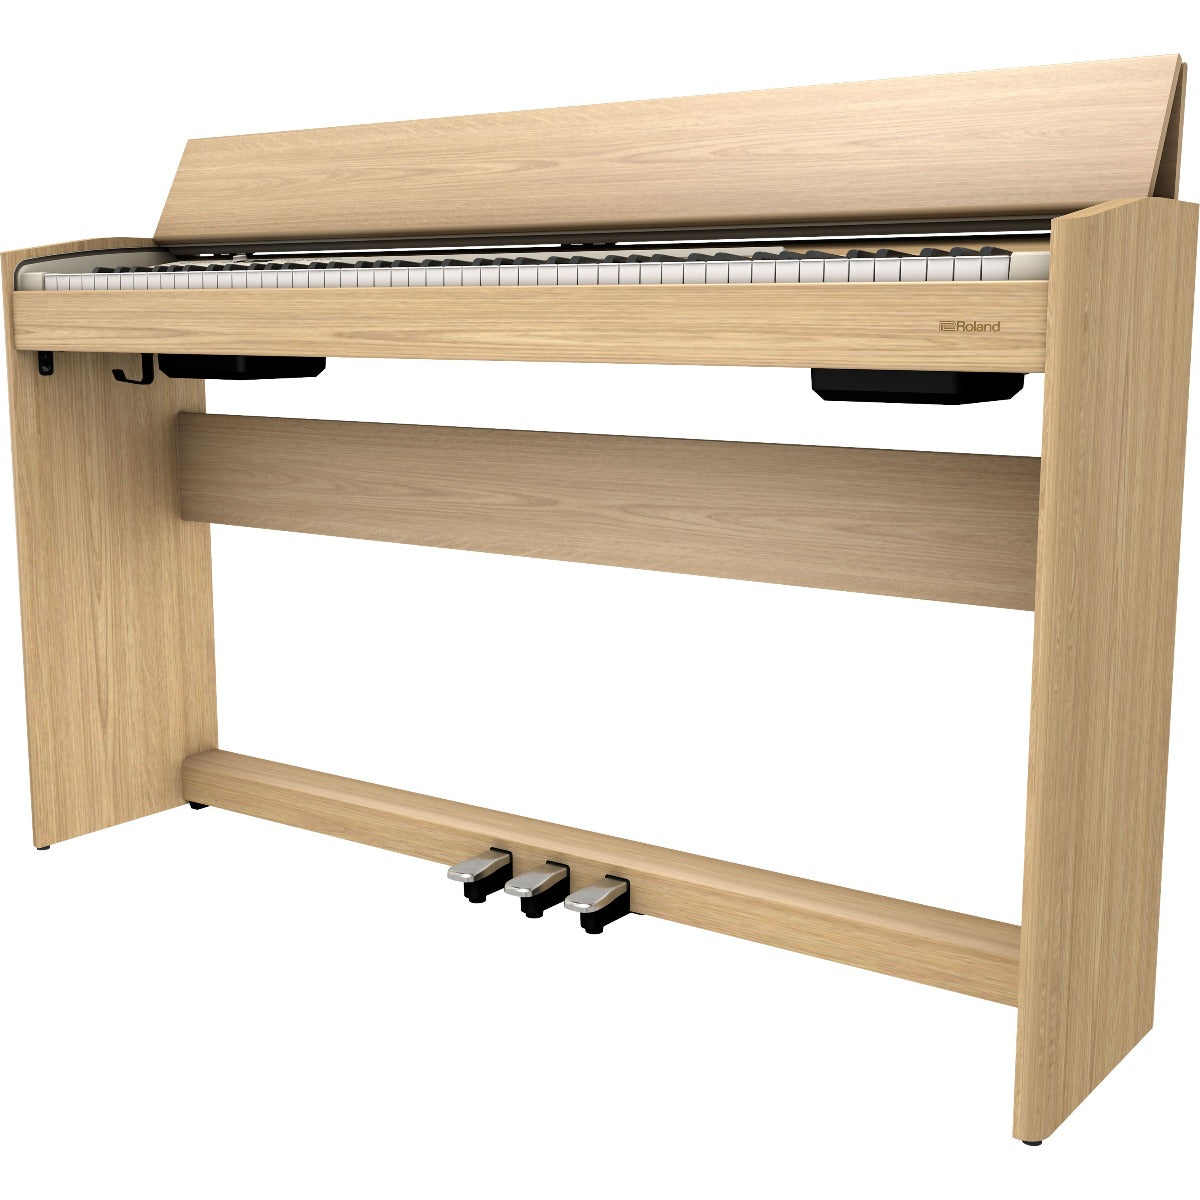 Perspective view of Roland F701 Digital Piano - Light Oak showing front and right side